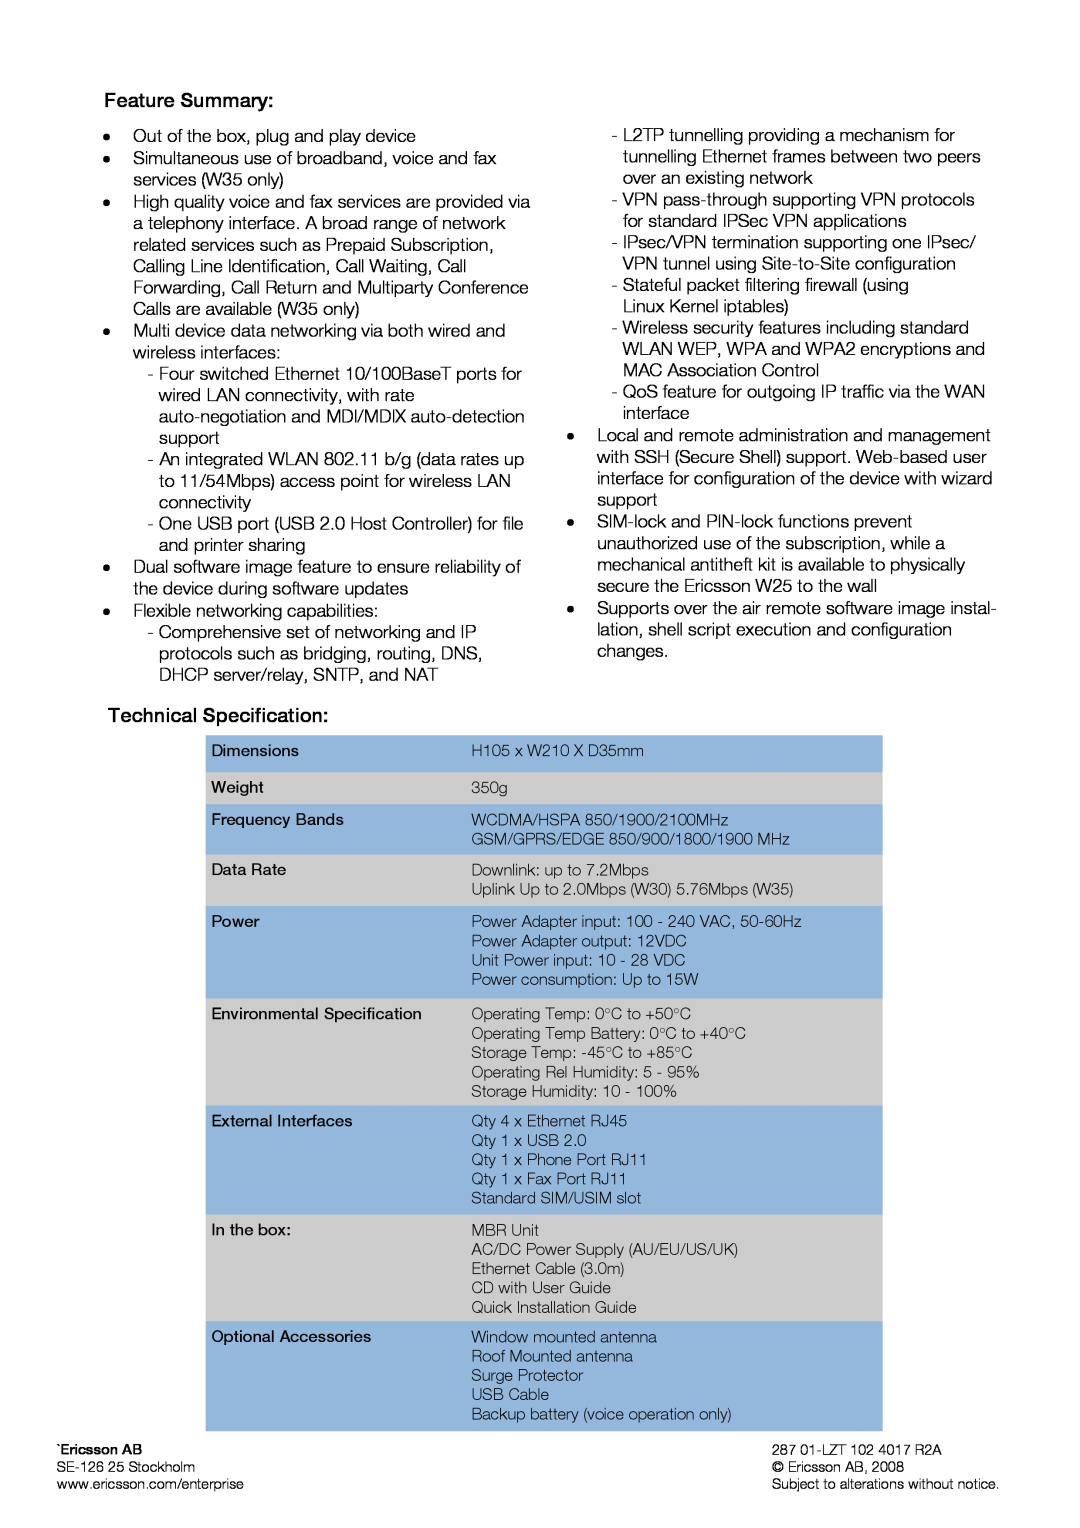 Ericsson W30, W35 manual Feature Summary, Technical Specification 